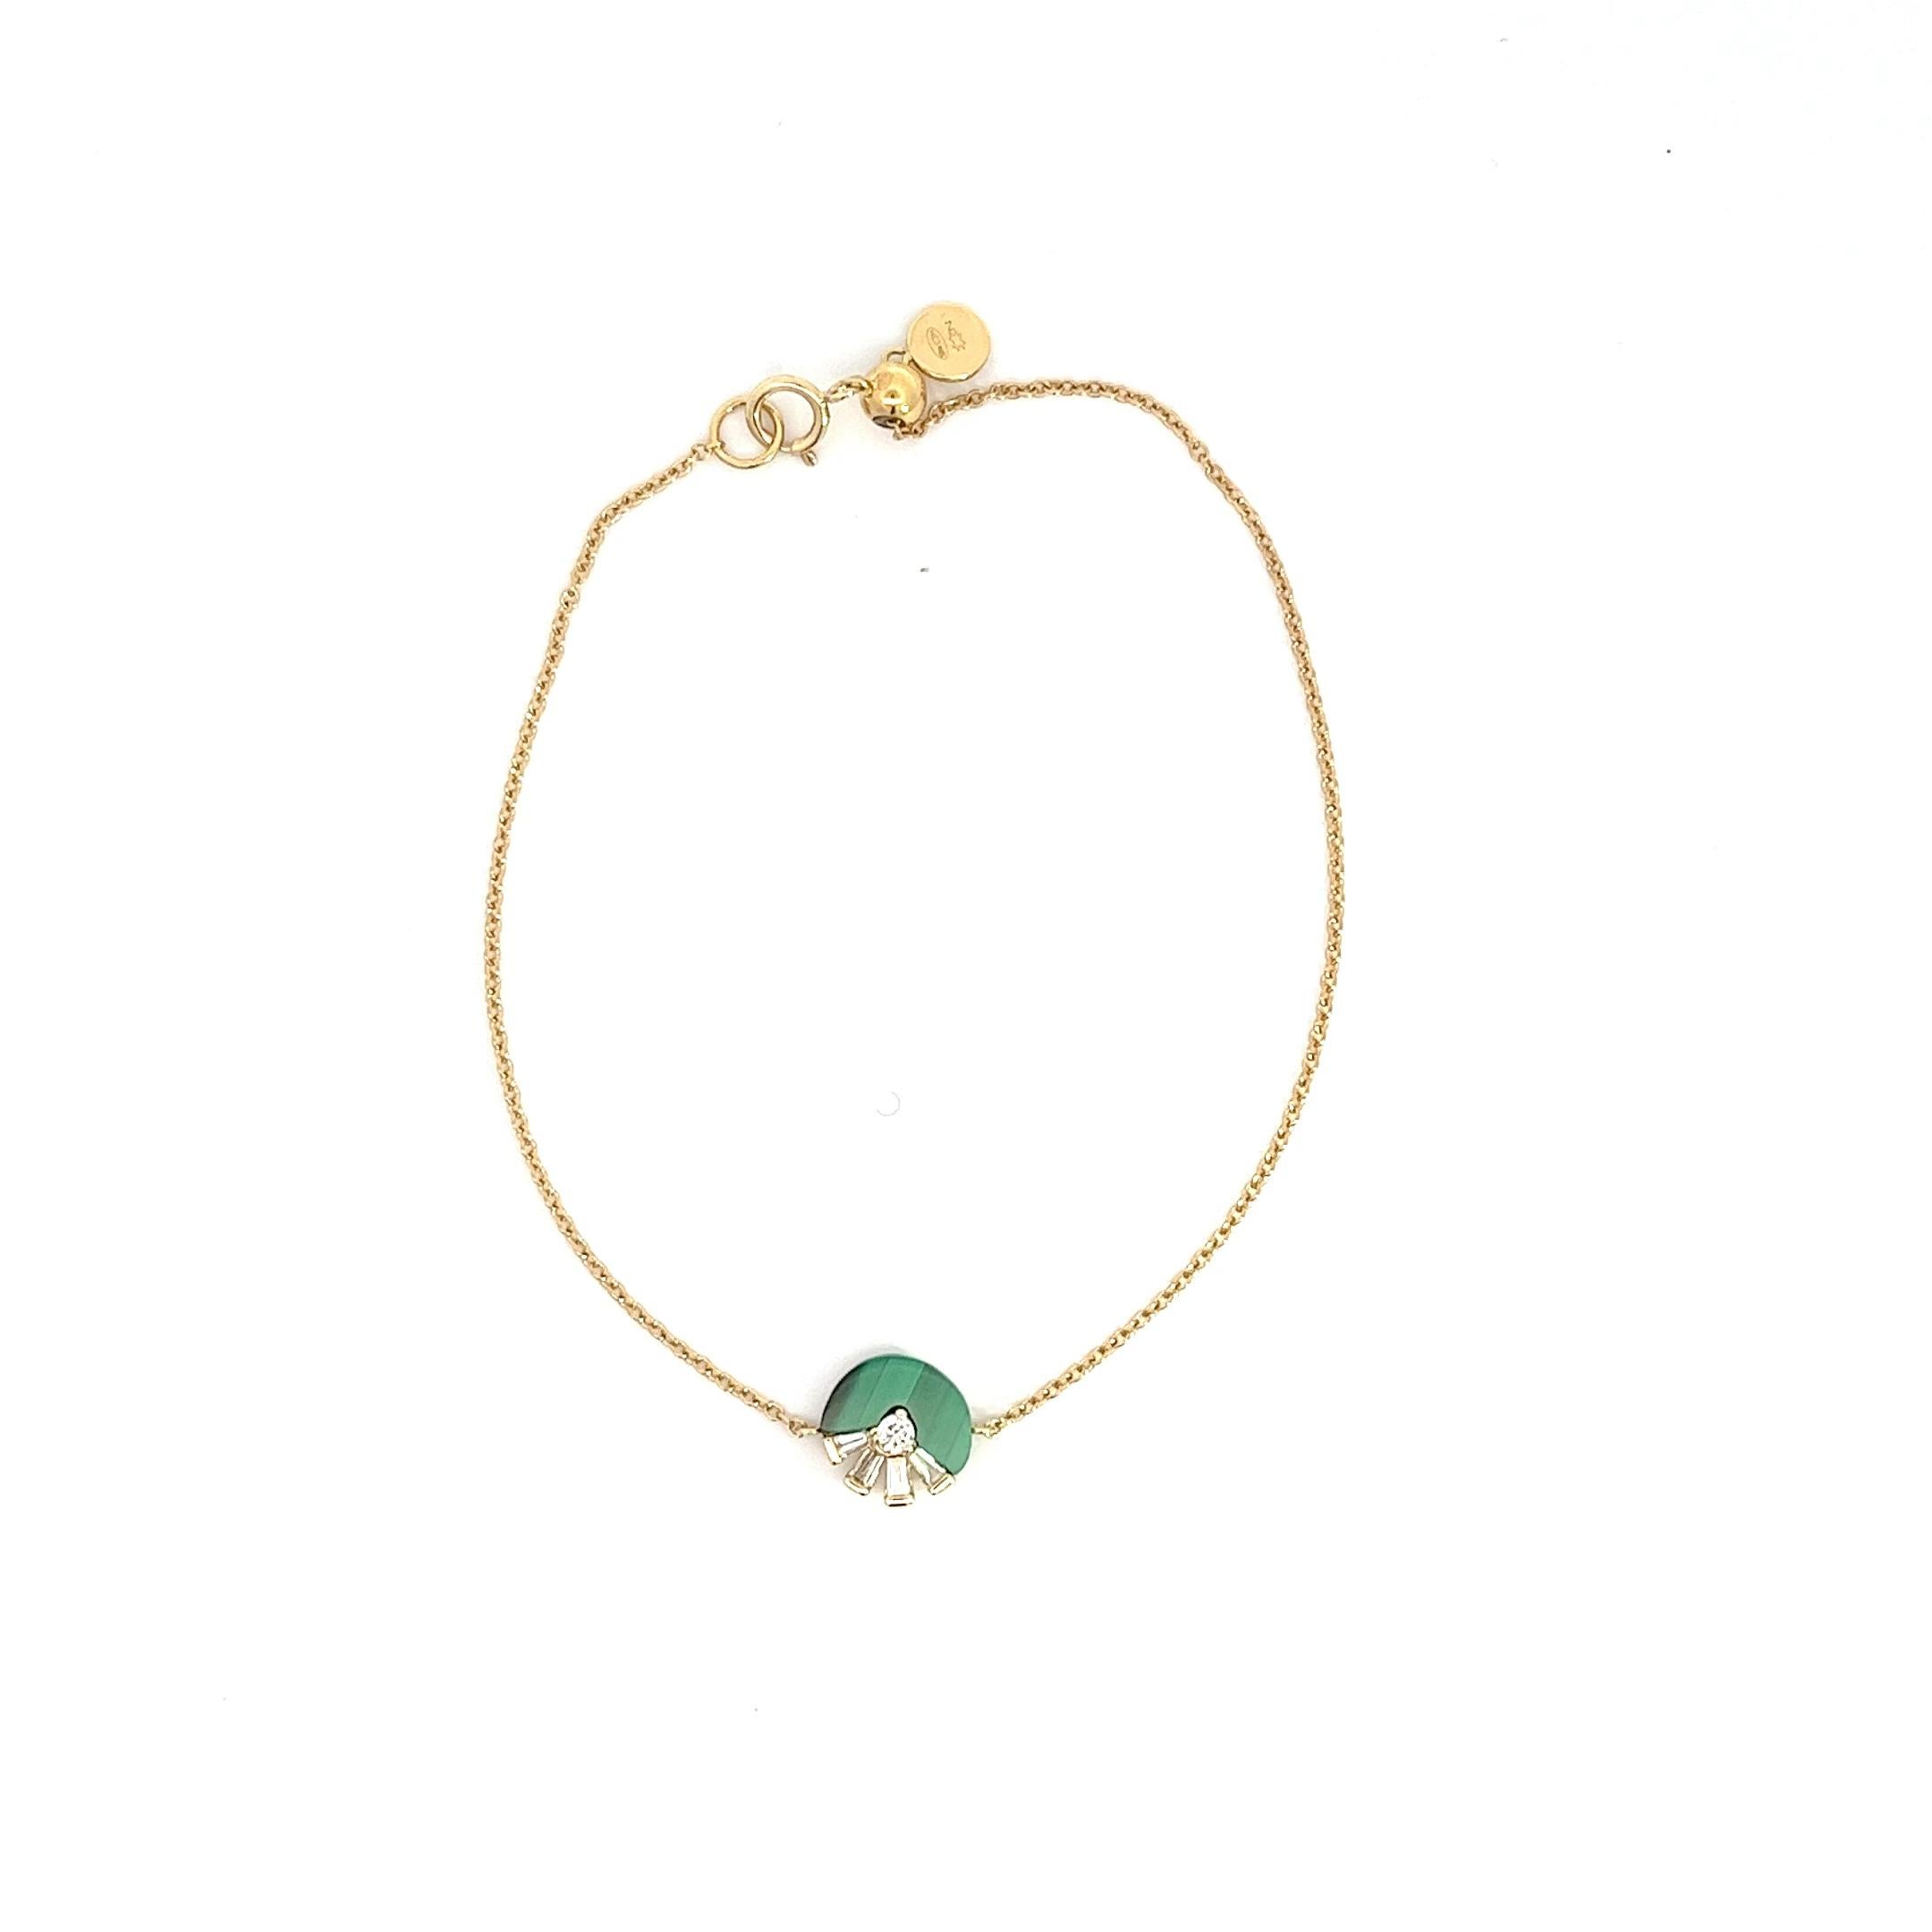 
Bracelet 14K Yellow Gold 

Diamonds 6 - 0.081cts
Diamonds 1 - 0.043cts
TP4 - 0.086cts
Malachite 1 - 0.827cts

Weight 1.559g

With a heritage of ancient fine Swiss jewelry traditions, NATKINA is a Geneva based jewellery brand, which creates modern